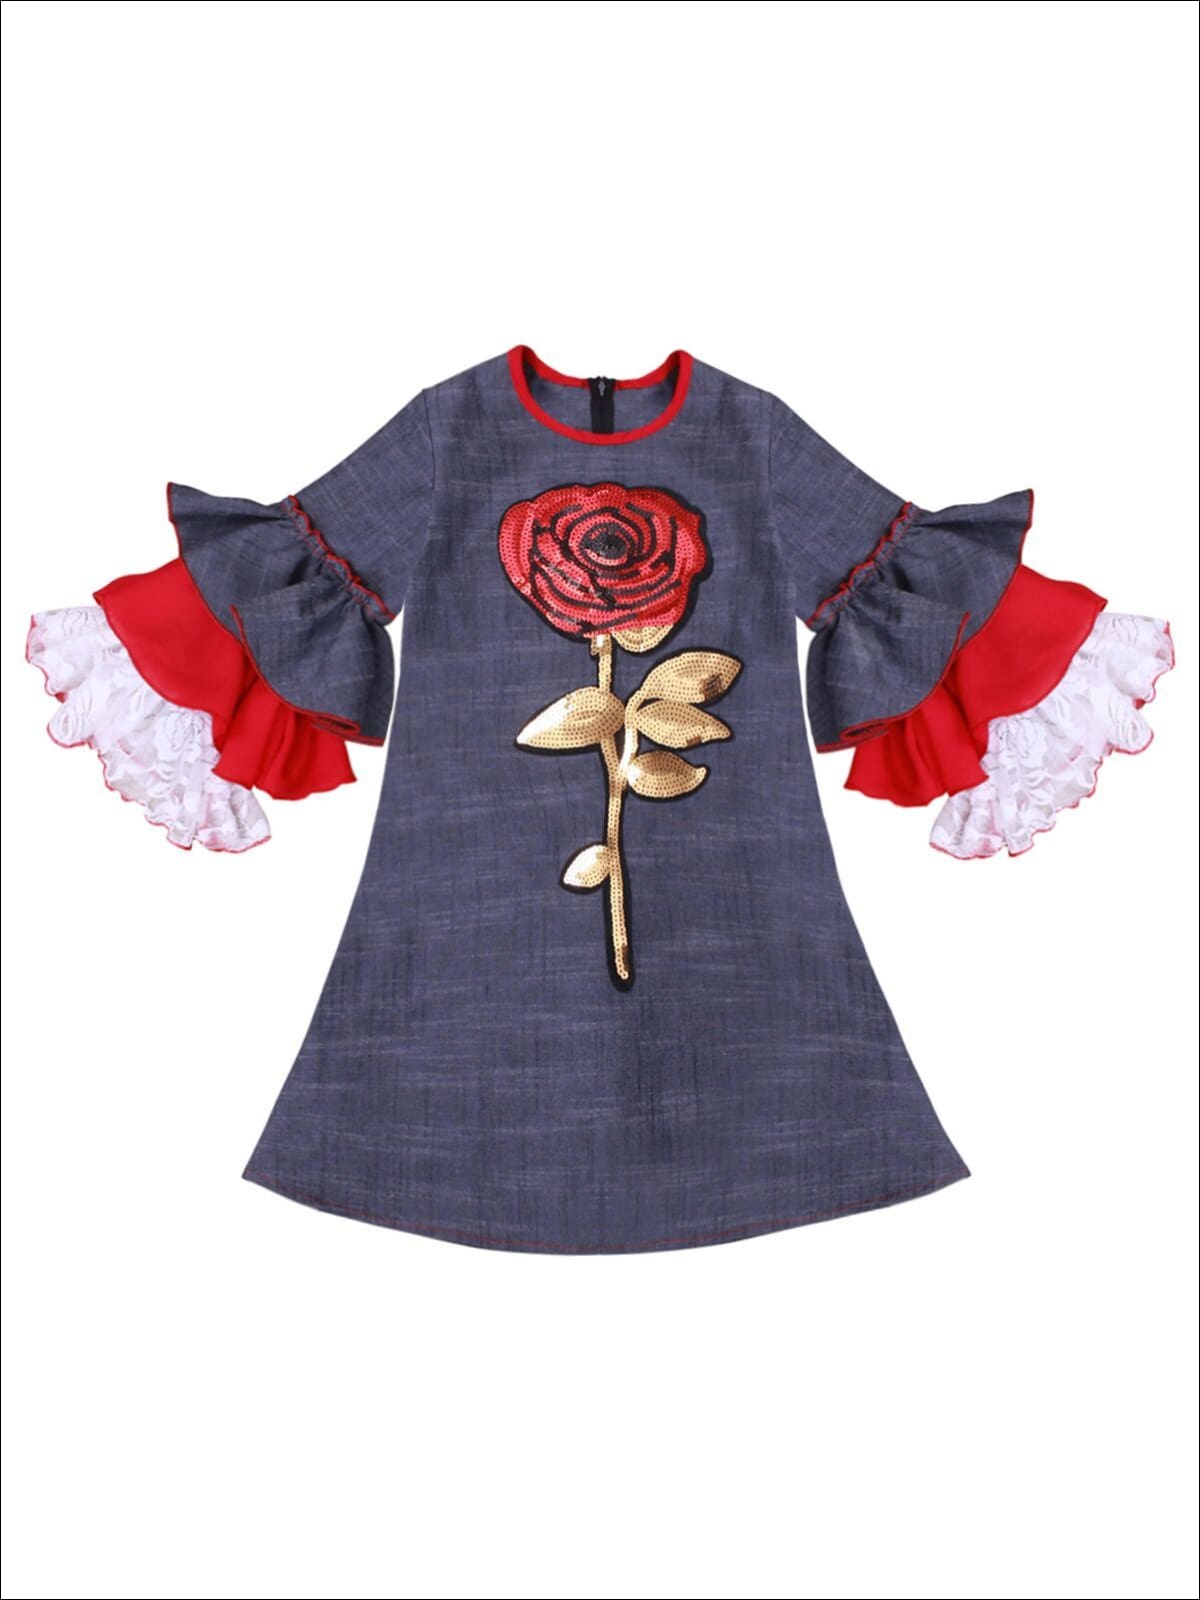 Girls Long Tiered Ruffled Sleeve Dress with Floral Trim - Blue / 2T-3T - Girls Fall Dressy Dress